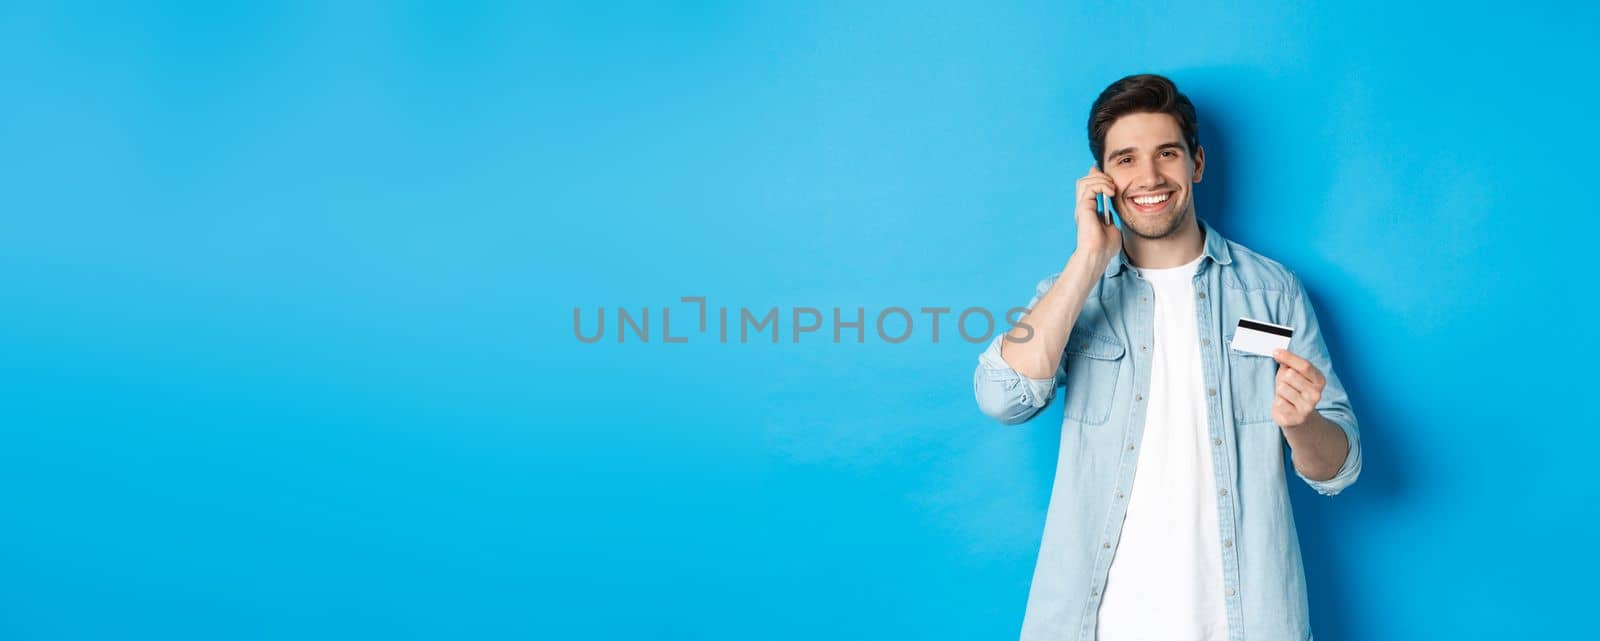 Handsome man calling bank and holding credit card, having mobile conversation, standing over blue background.